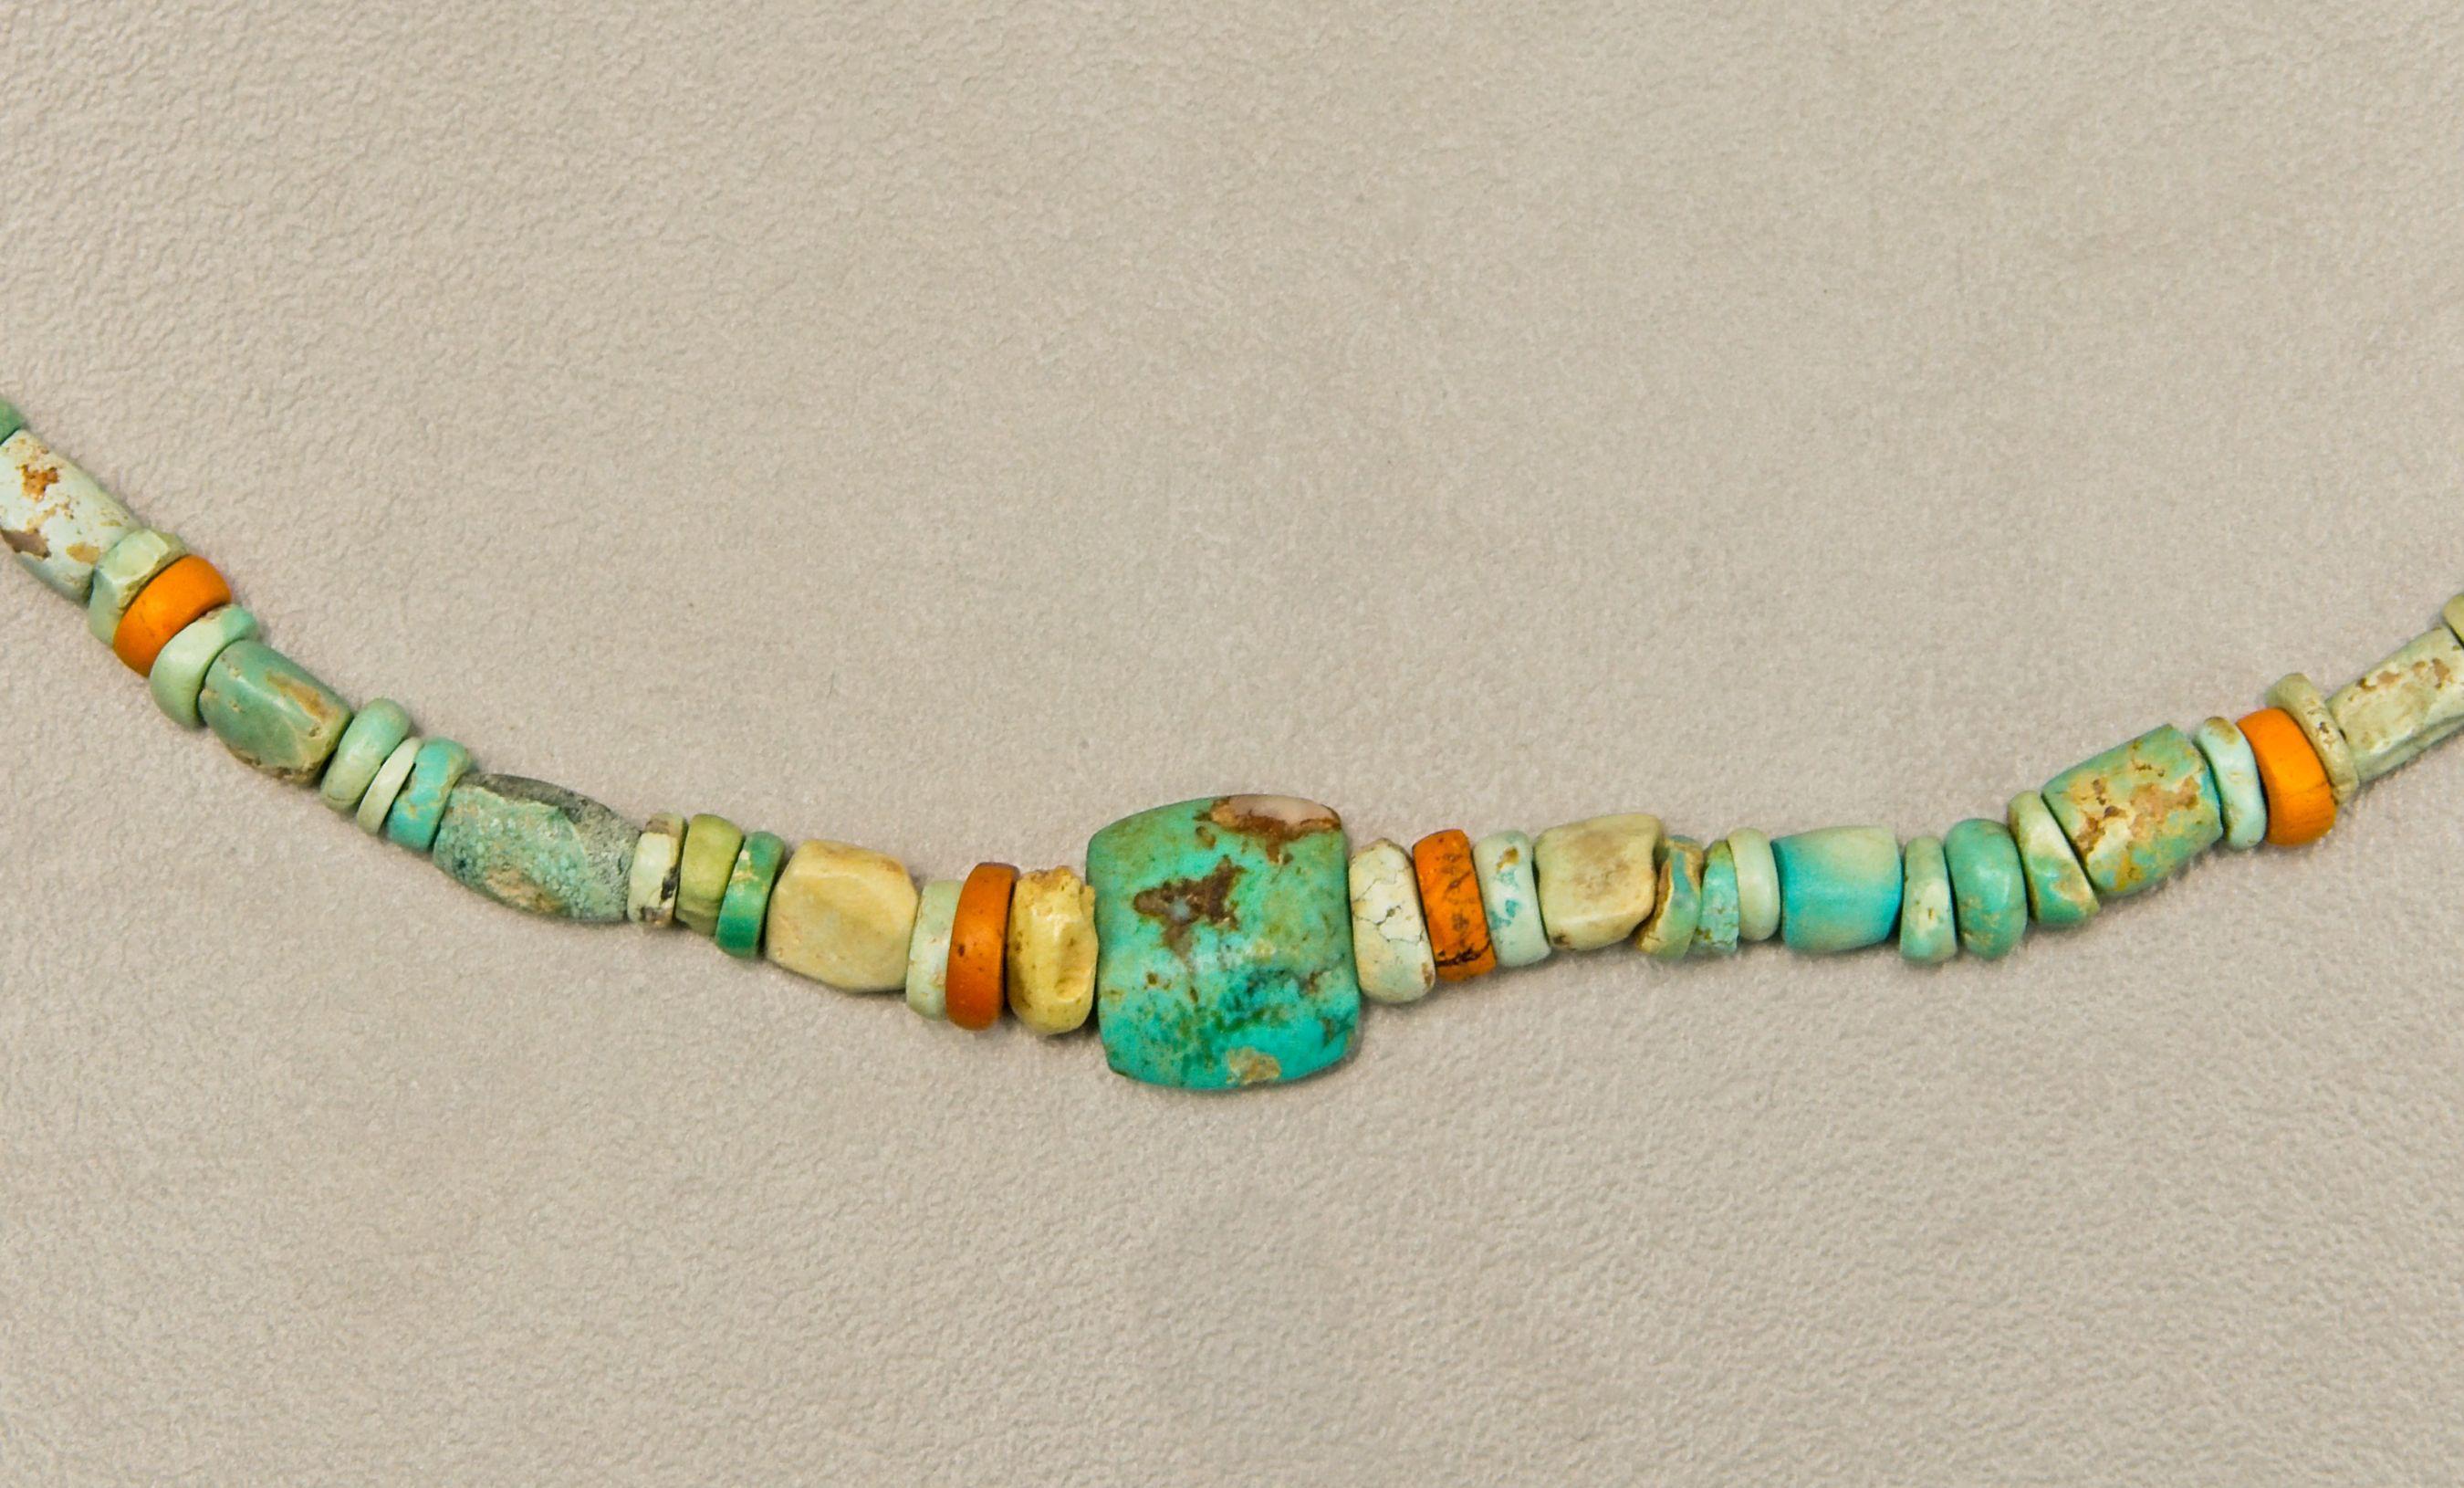 Two hundred twenty-seven ancient turquoise beads with twenty orange colored ancient glass disc beads evenly spaced throughout the necklace. There are one hundred sixty-six very small turquoise disc beads and sixty tube or flattened tube beads. At